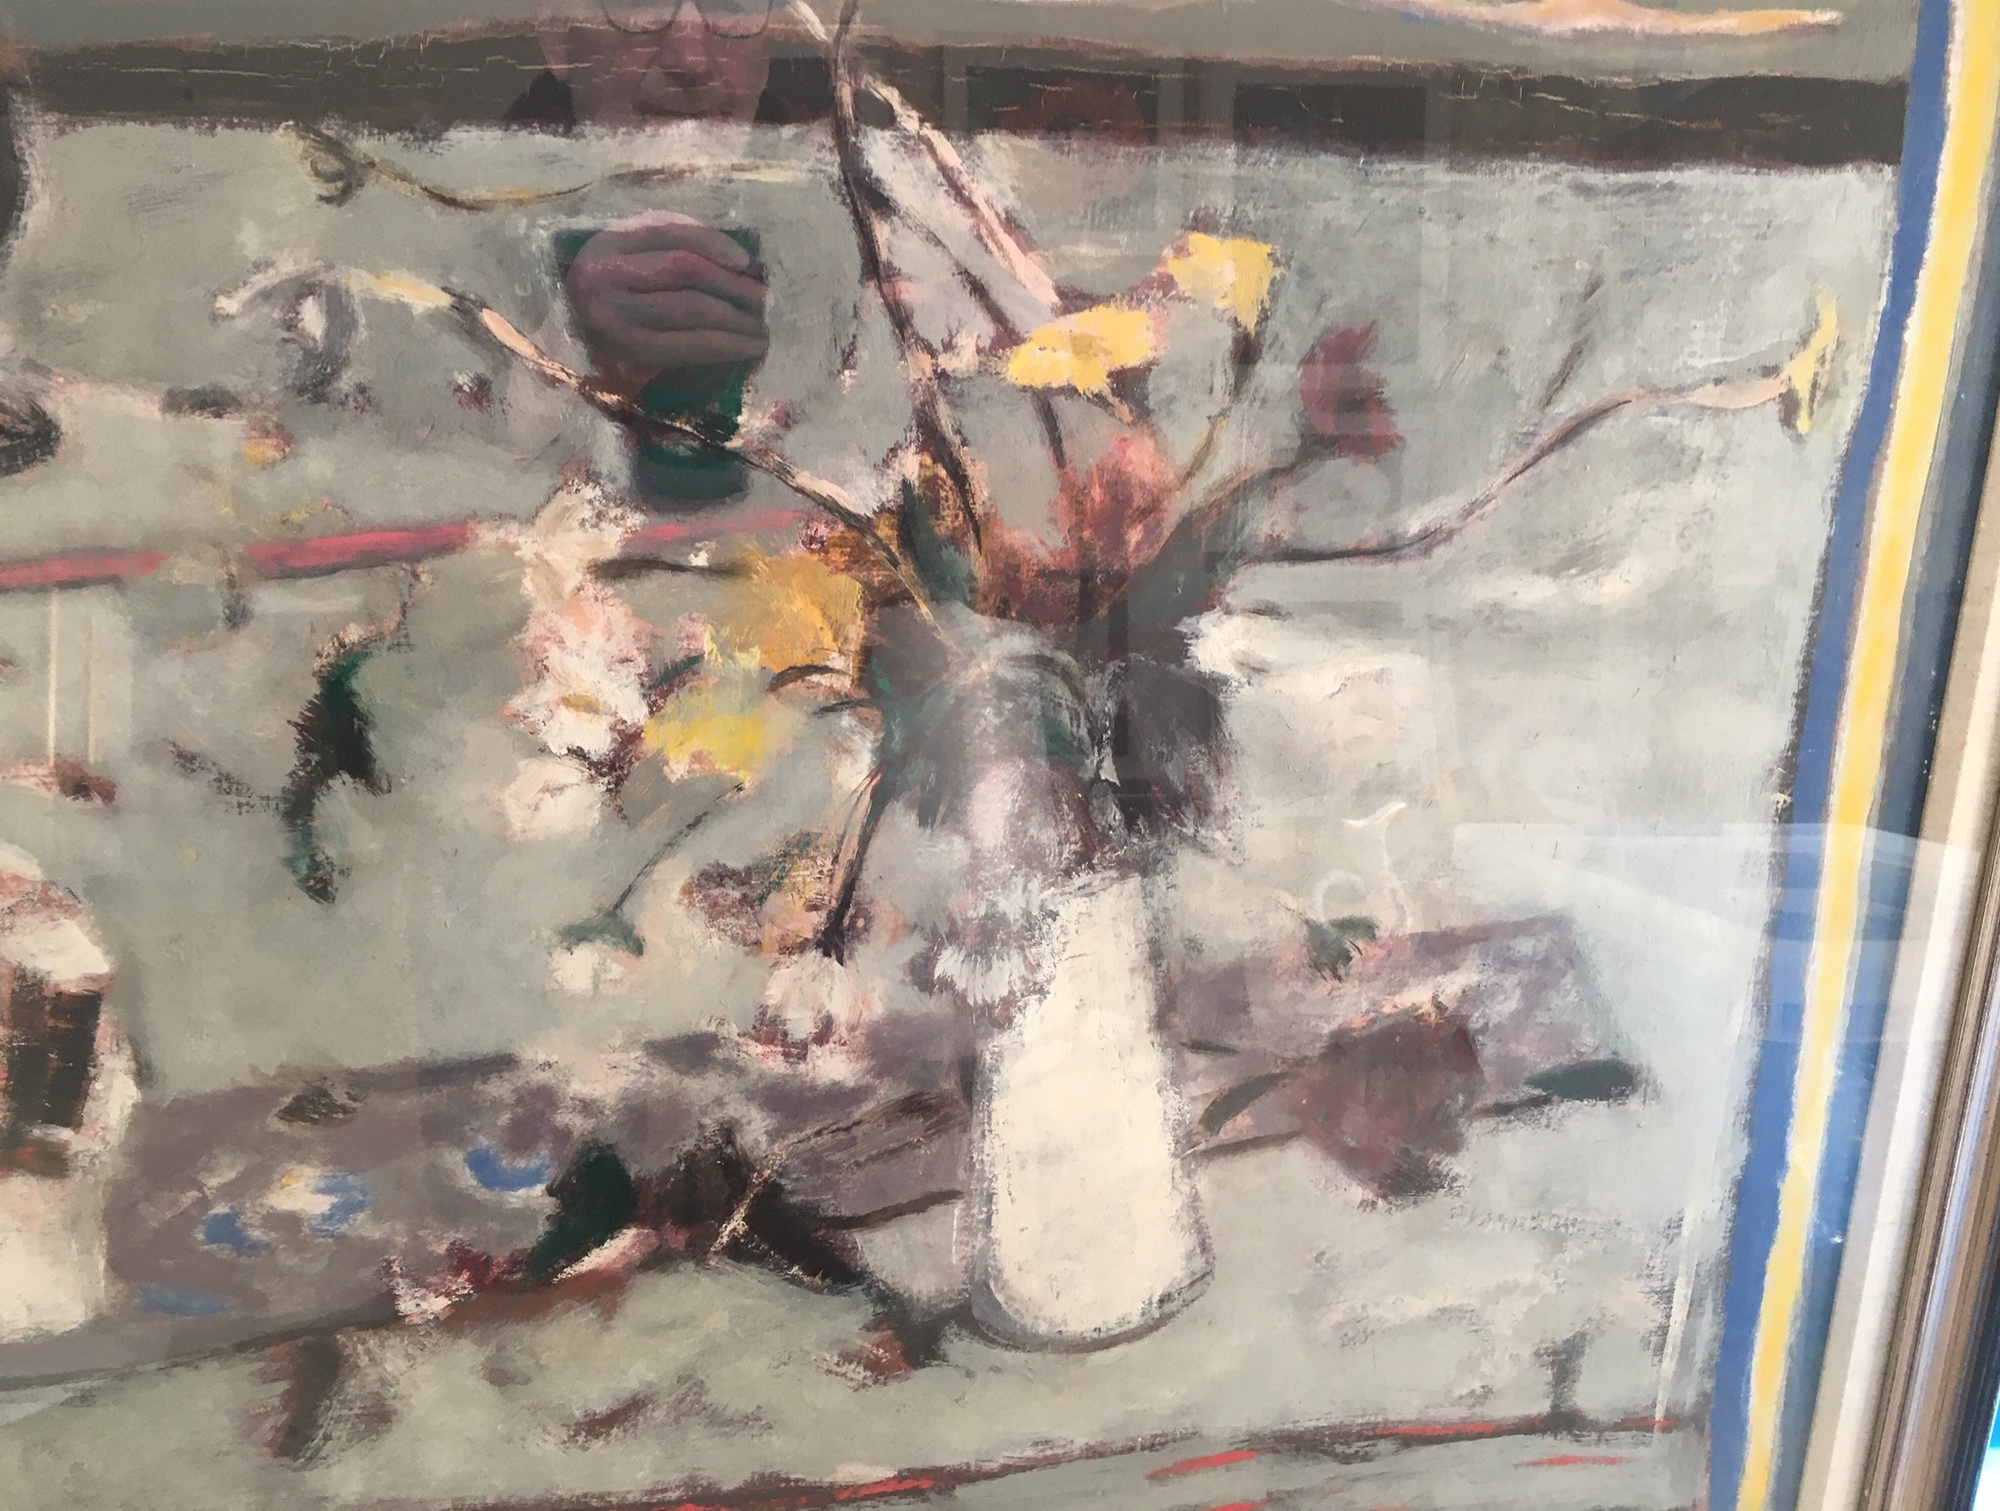 William Baillie 1984 Oil Painting - Grey Table and White Jug 90cm x 70cm. - Image 4 of 6